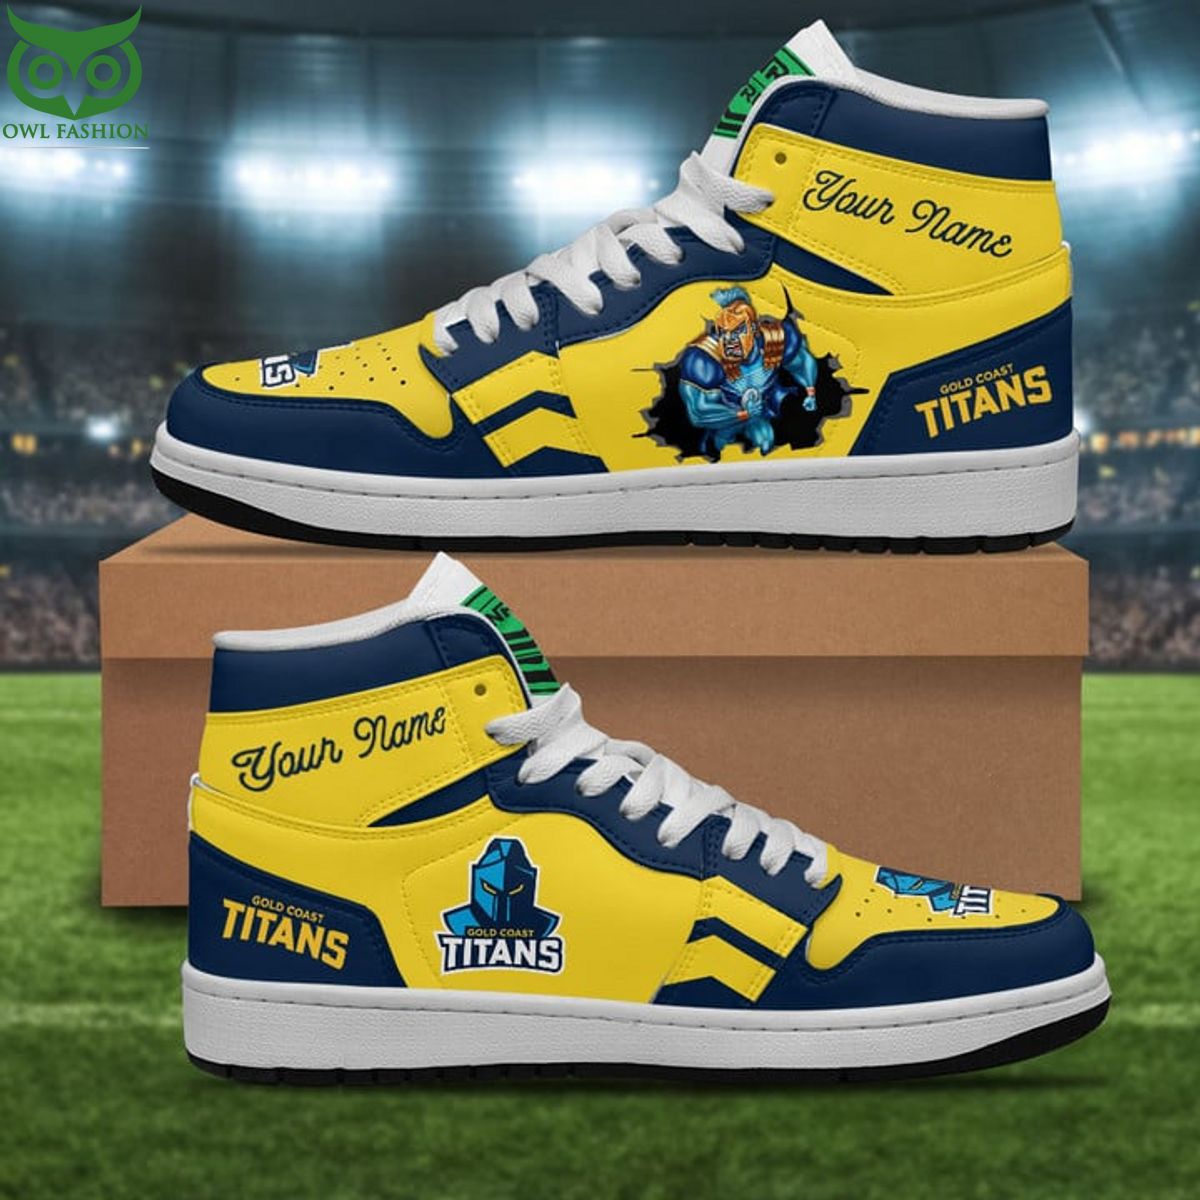 Personalized NRL Gold Coast Titans Air Jordan 1 Sneakers Limited